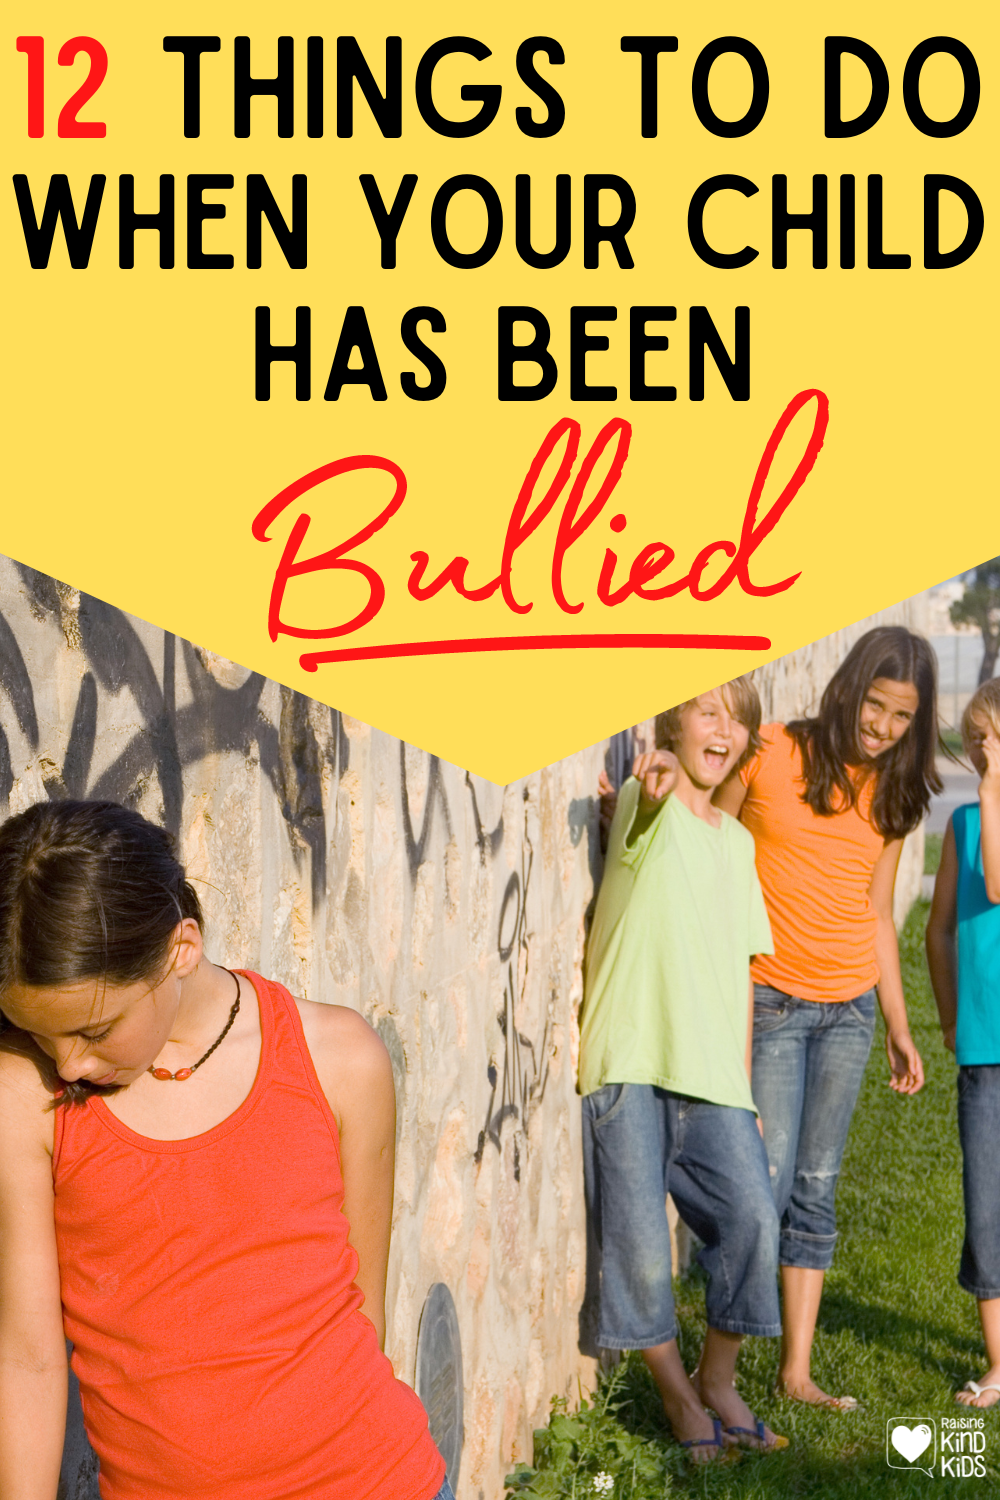 Is your child being bullied? Here's what to do when your child has been bullied in 12 steps. 